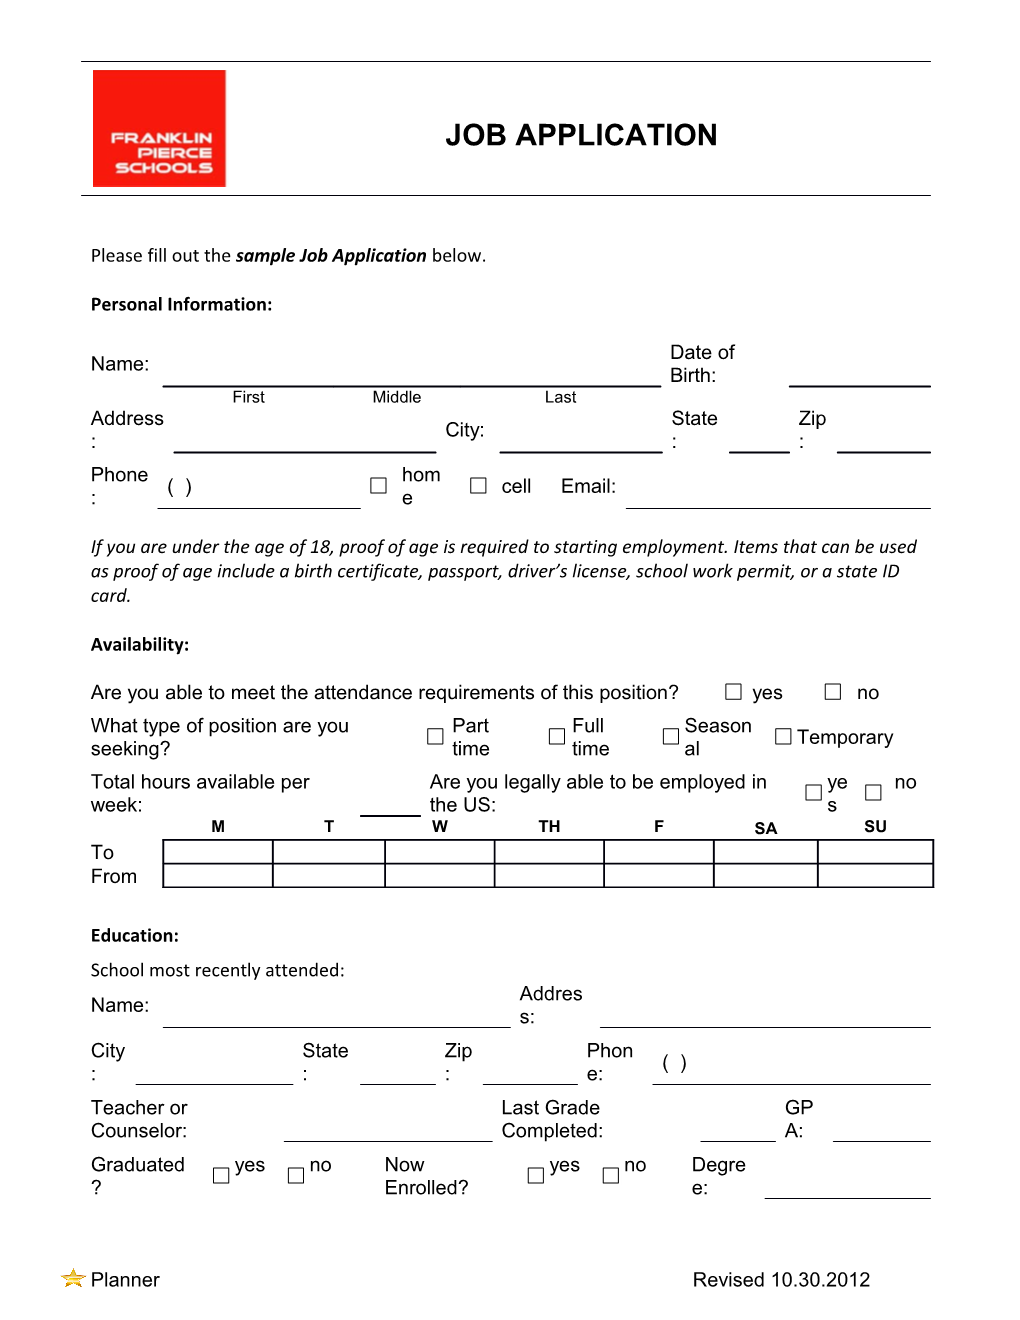 Please Fill out the Sample Job Application Below